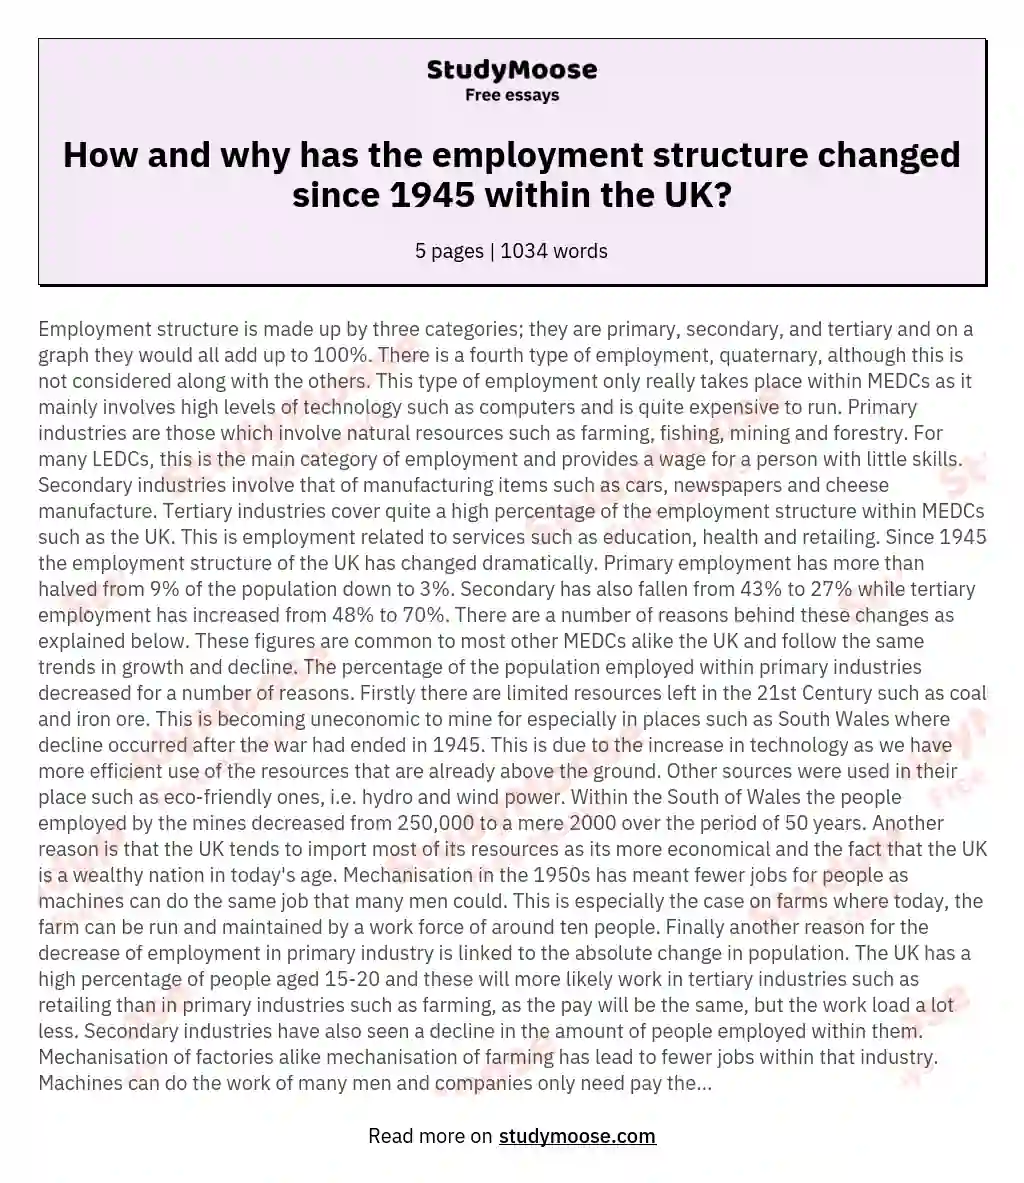 How and why has the employment structure changed since 1945 within the UK? essay